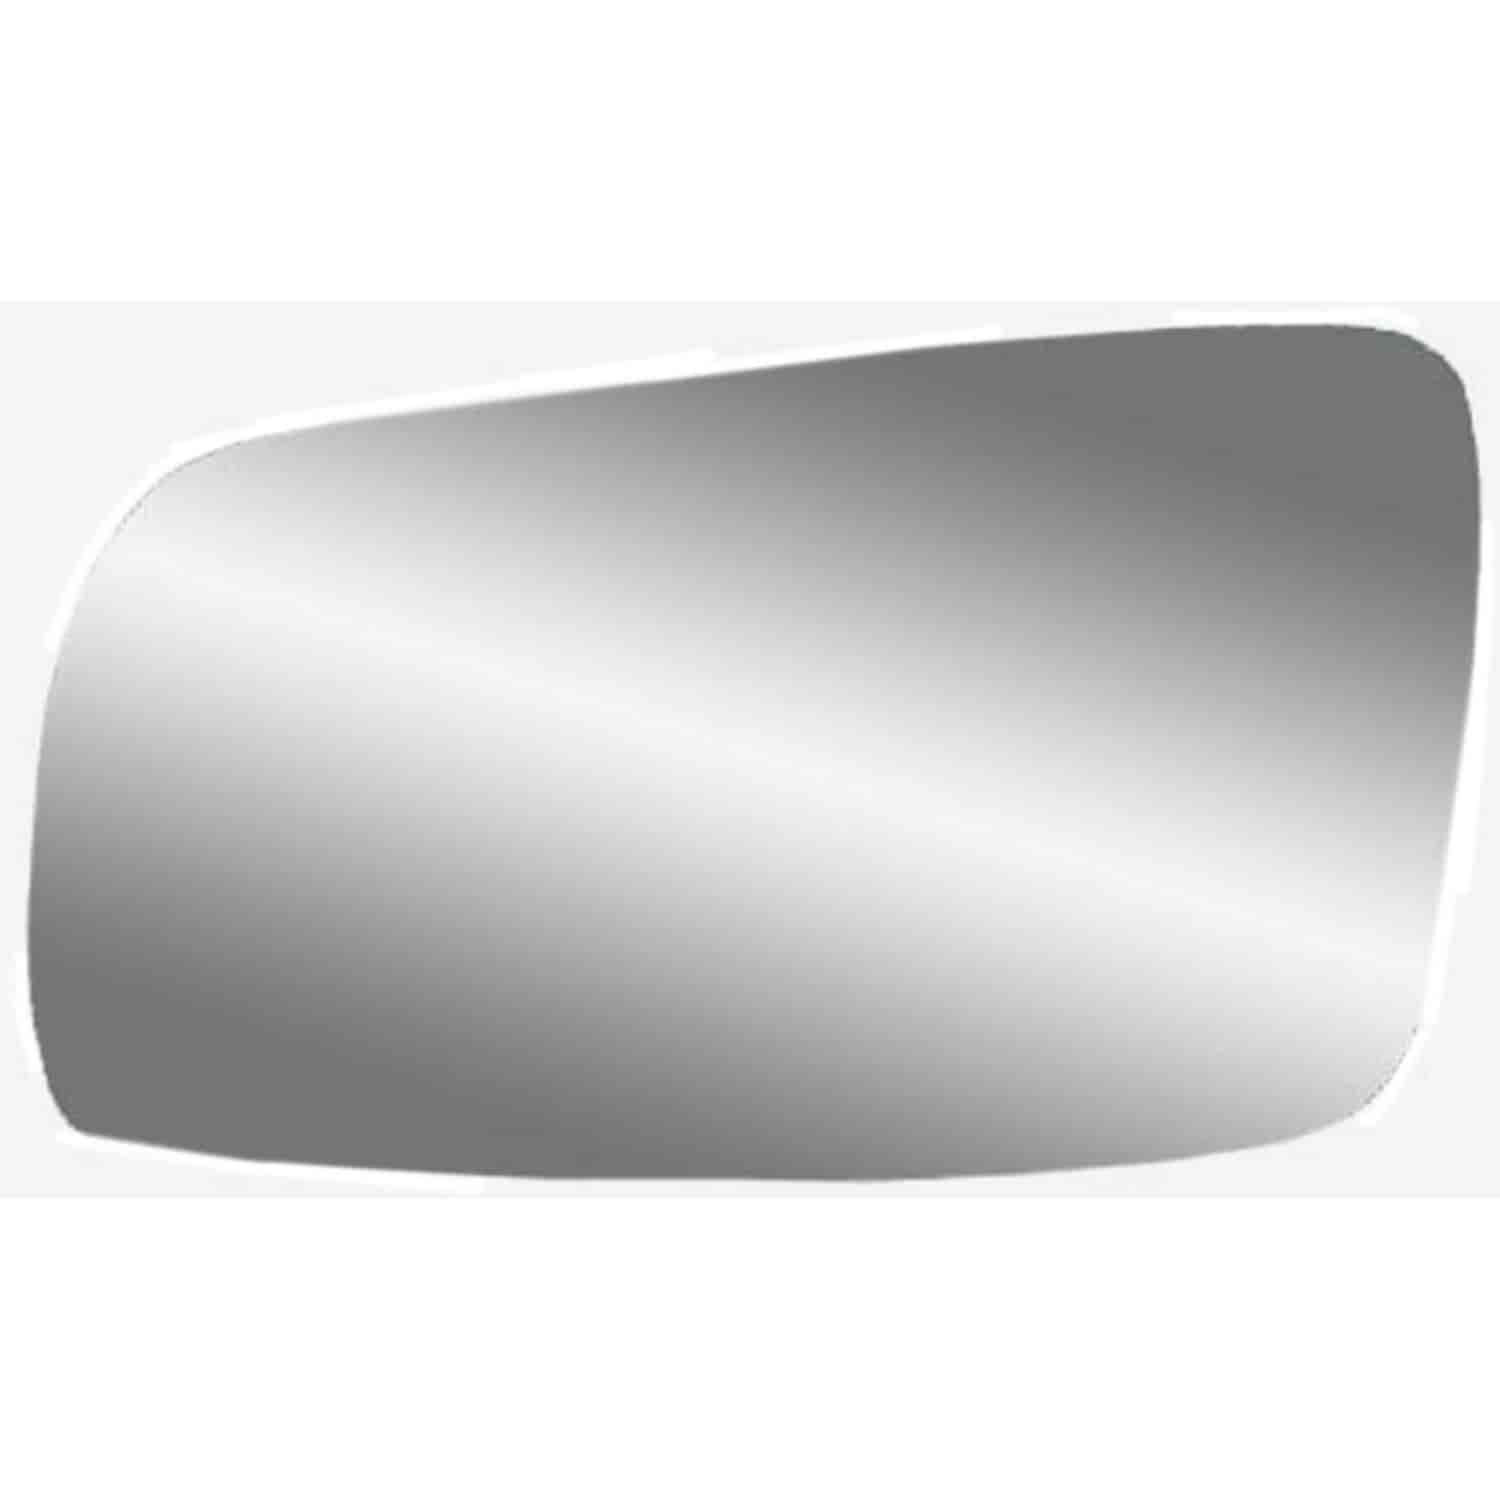 Replacement Glass Assembly for 99-05 Golf/GTI 4th Generation chrome lens replace your cracked or bro